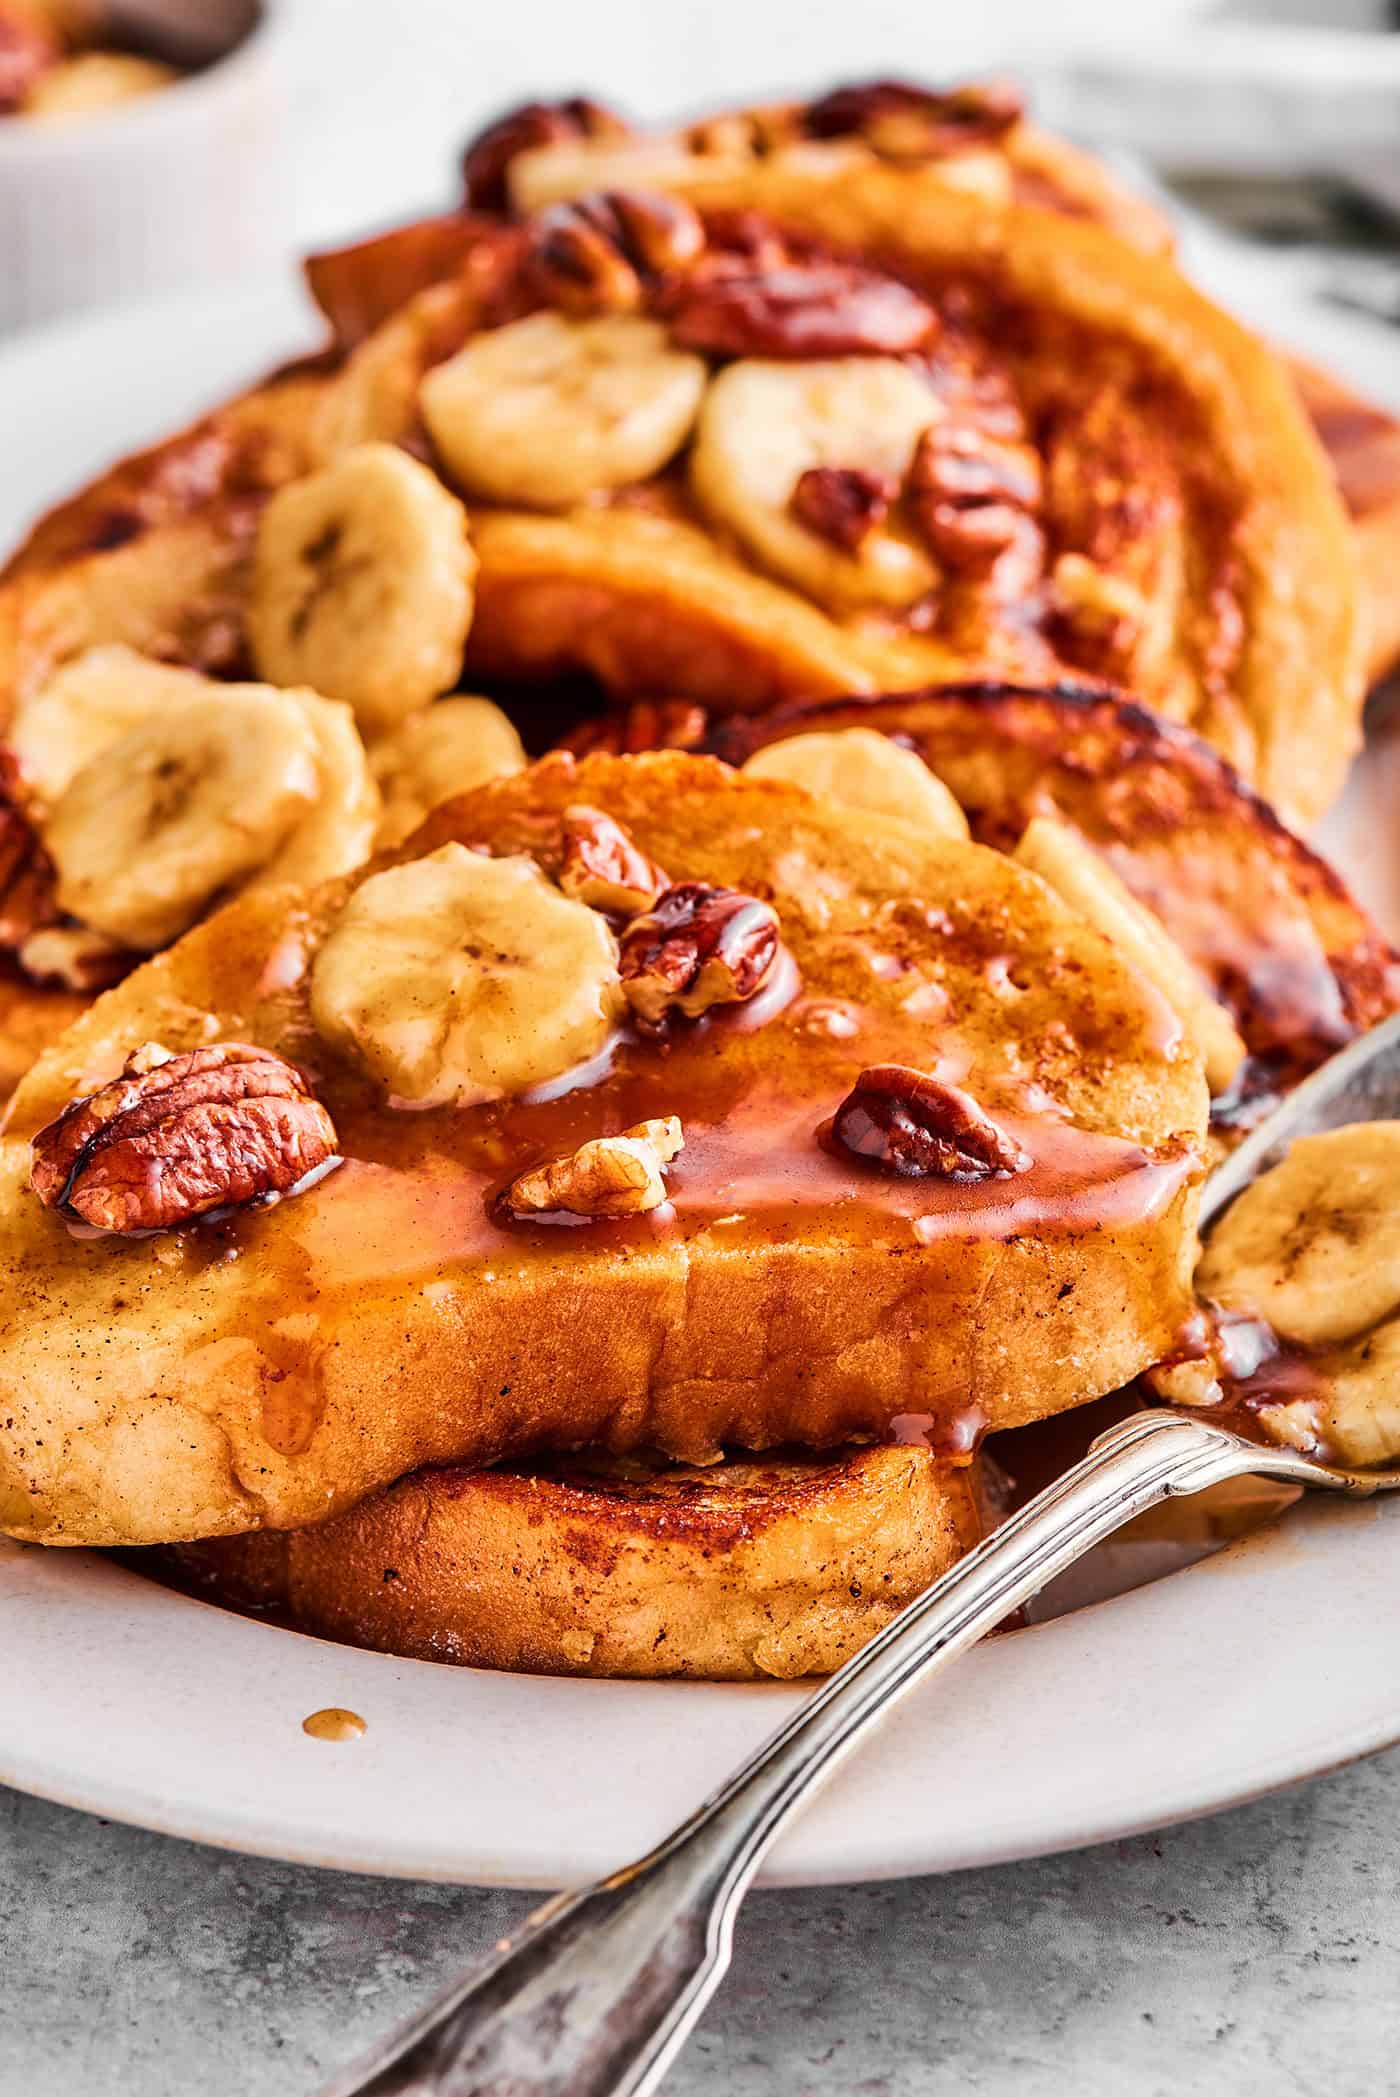 French toast with bananas foster sauce, layered on a white platter